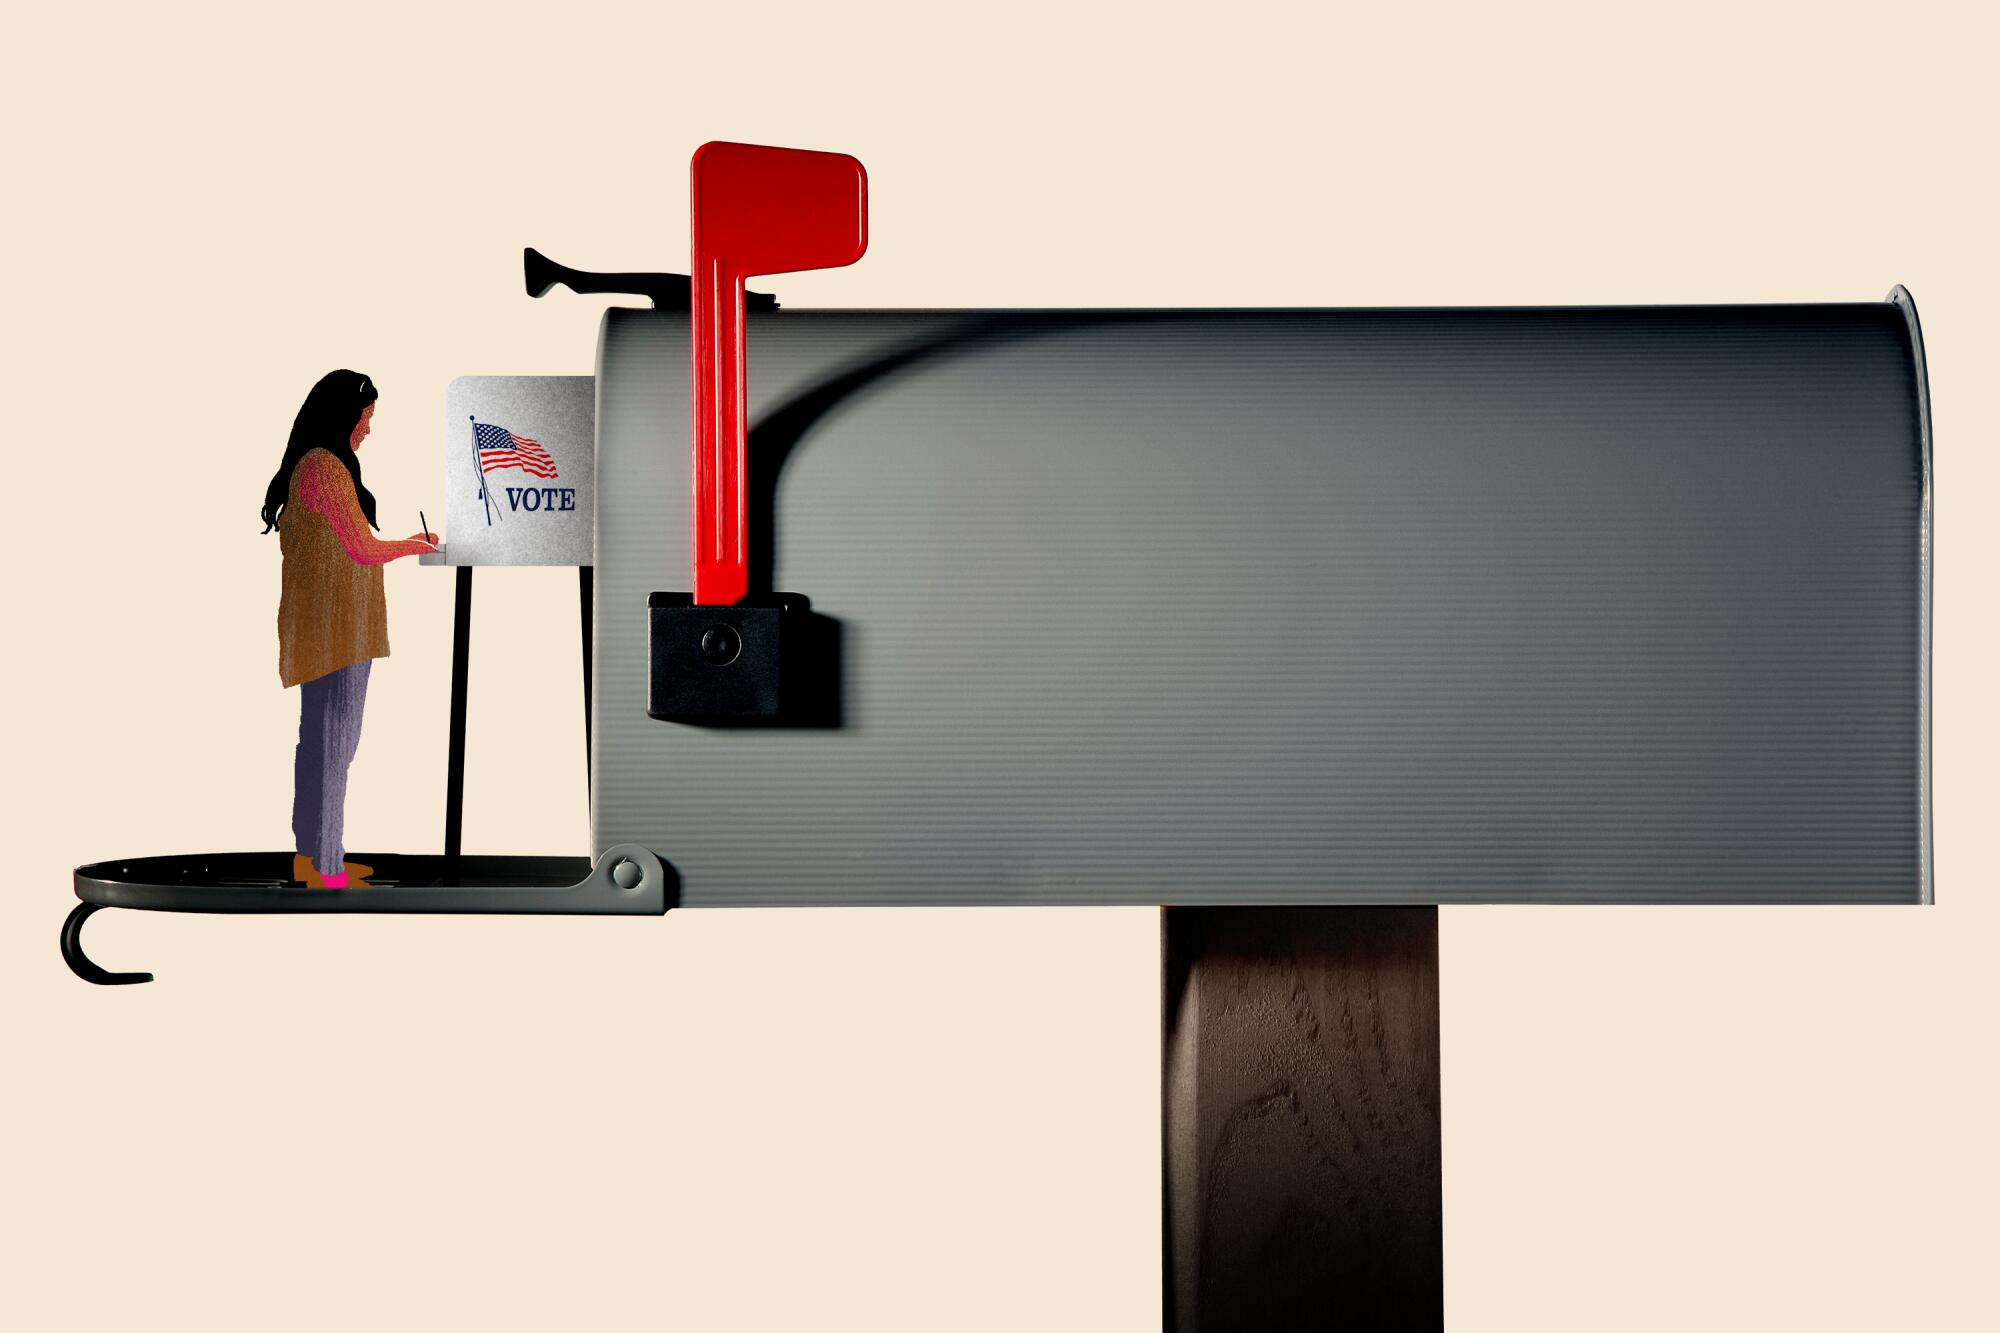 An illustration of a figure voting inside a mailbox with the red flag raised.